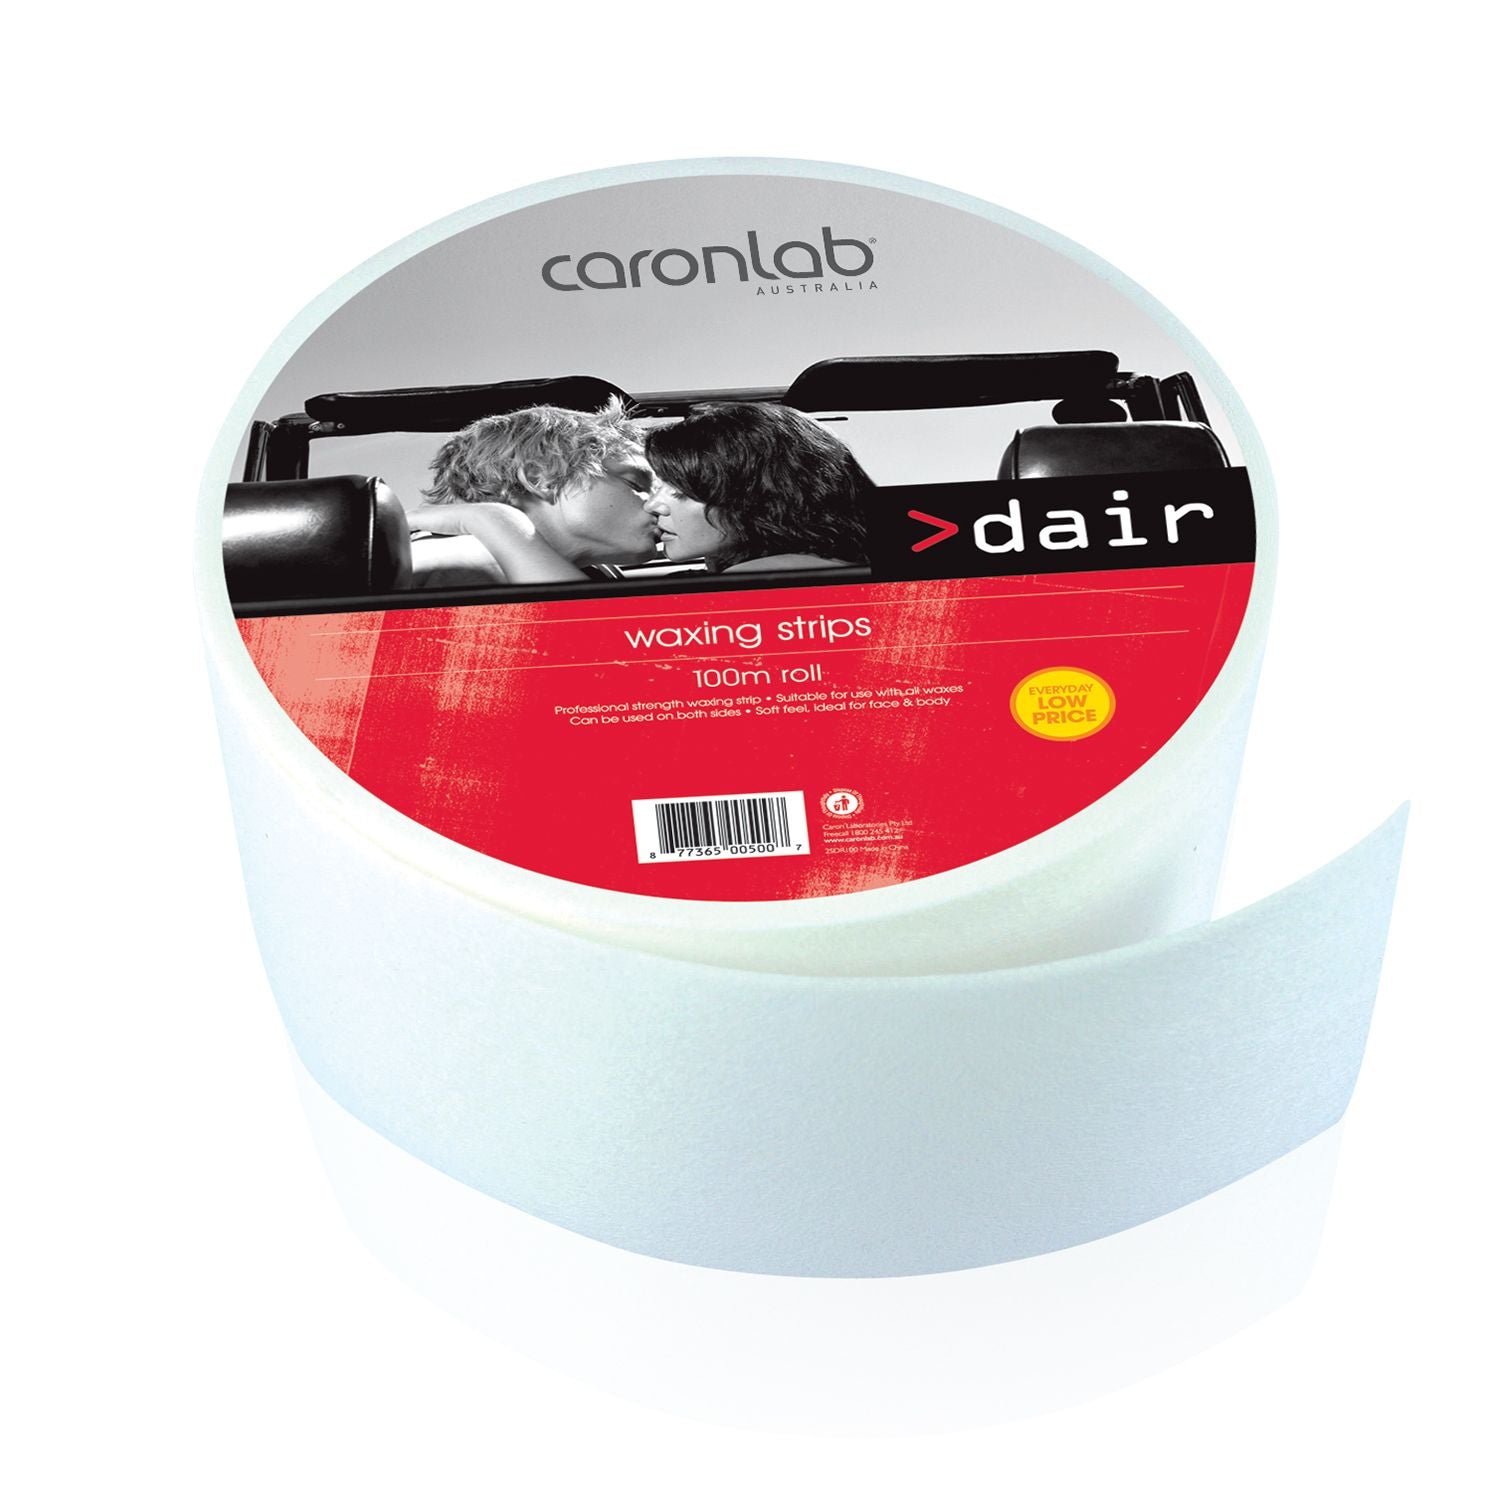 Caronlab Dair Roll - Non Woven - everyday low price 100m